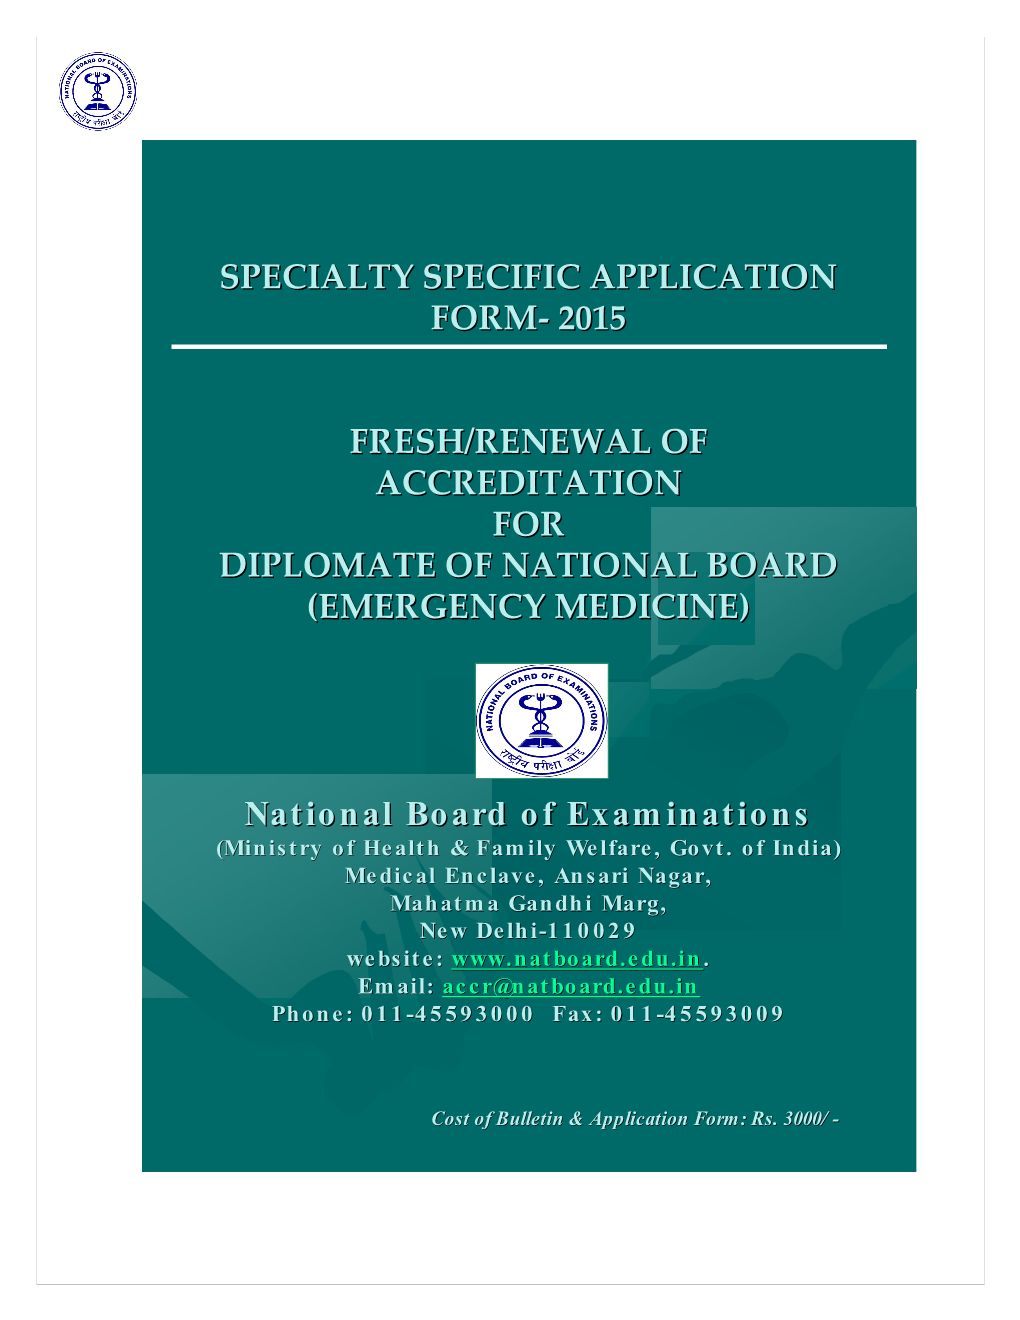 1.Guidelines for Drafting and Filing the Application Form for Accreditation